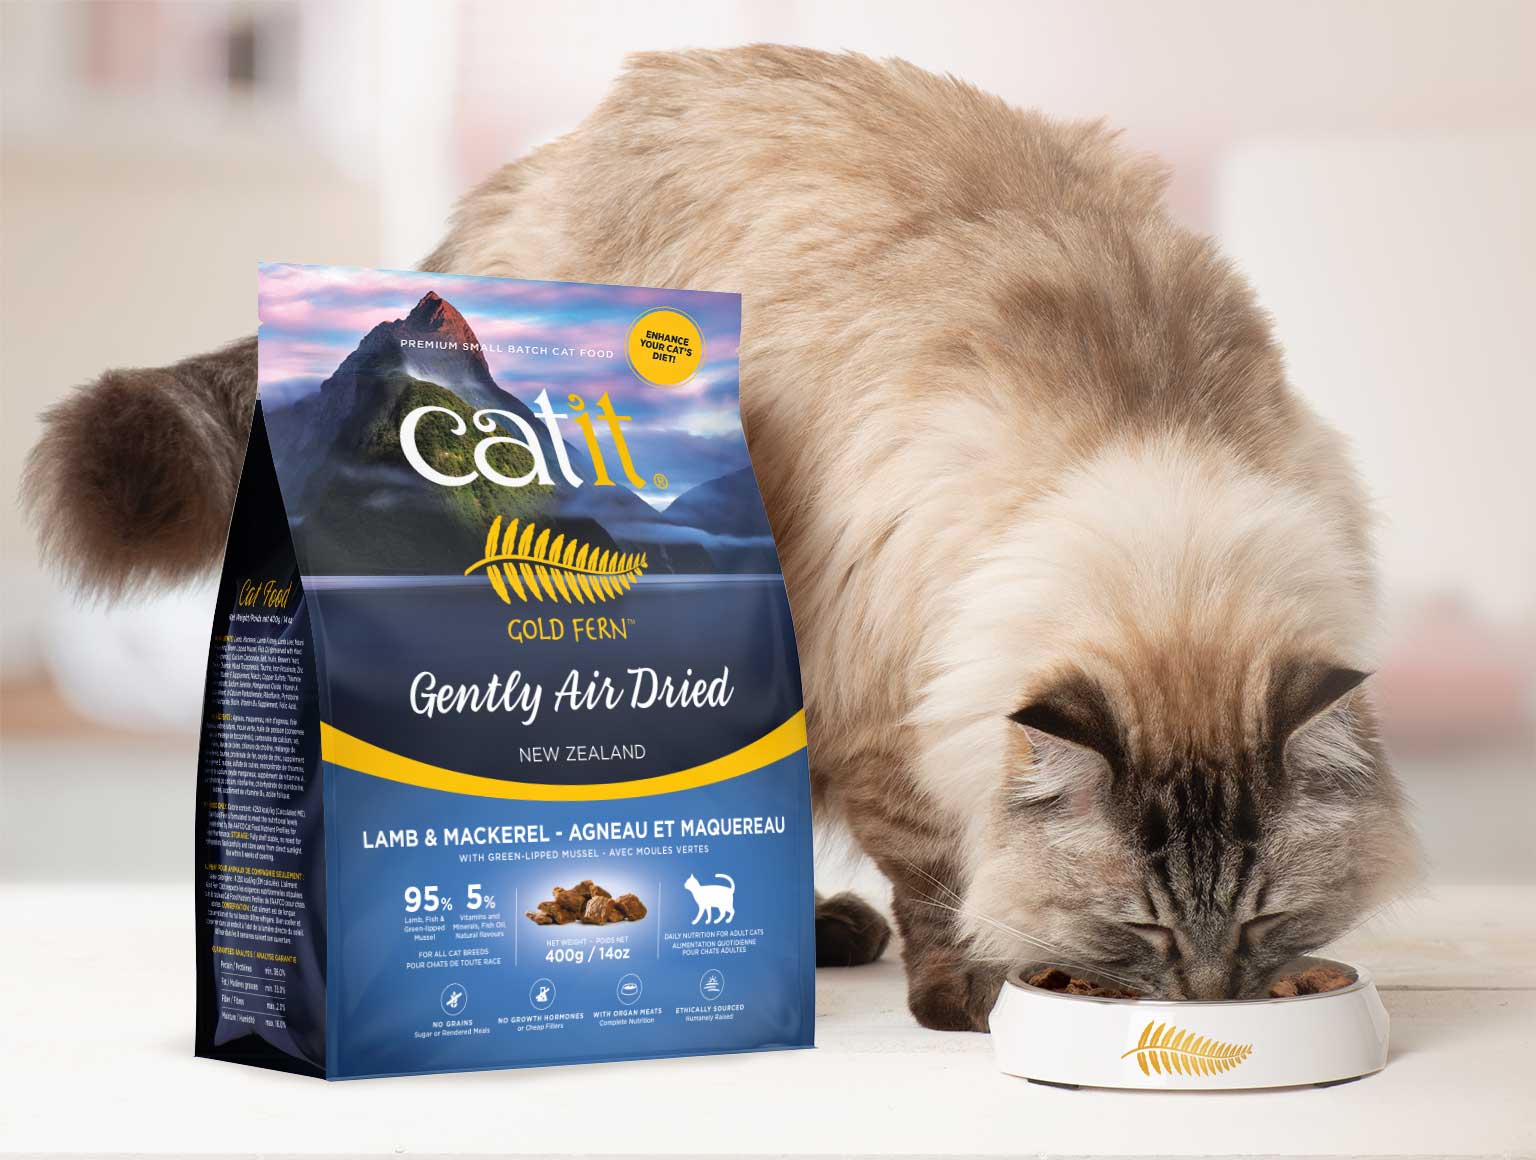 Dry cat kibble with well-preserved nutrients for enhancing your cat's diet